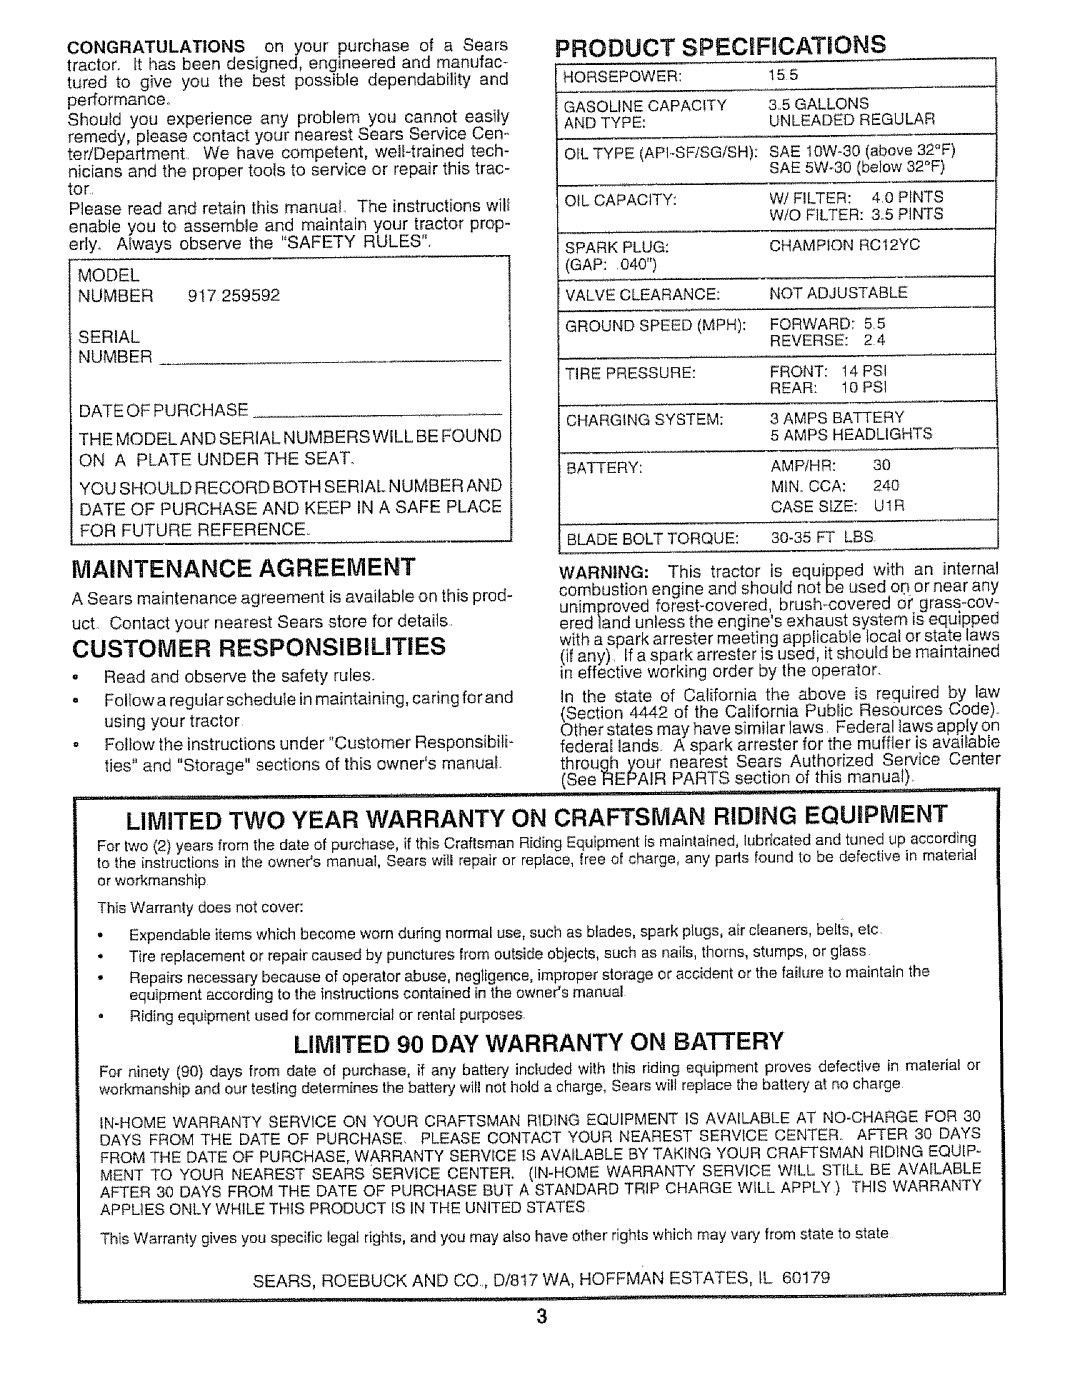 Craftsman 917.259592 owner manual Maintenance Agreement, Customer Responsibilities, Product Specifications, Gap 